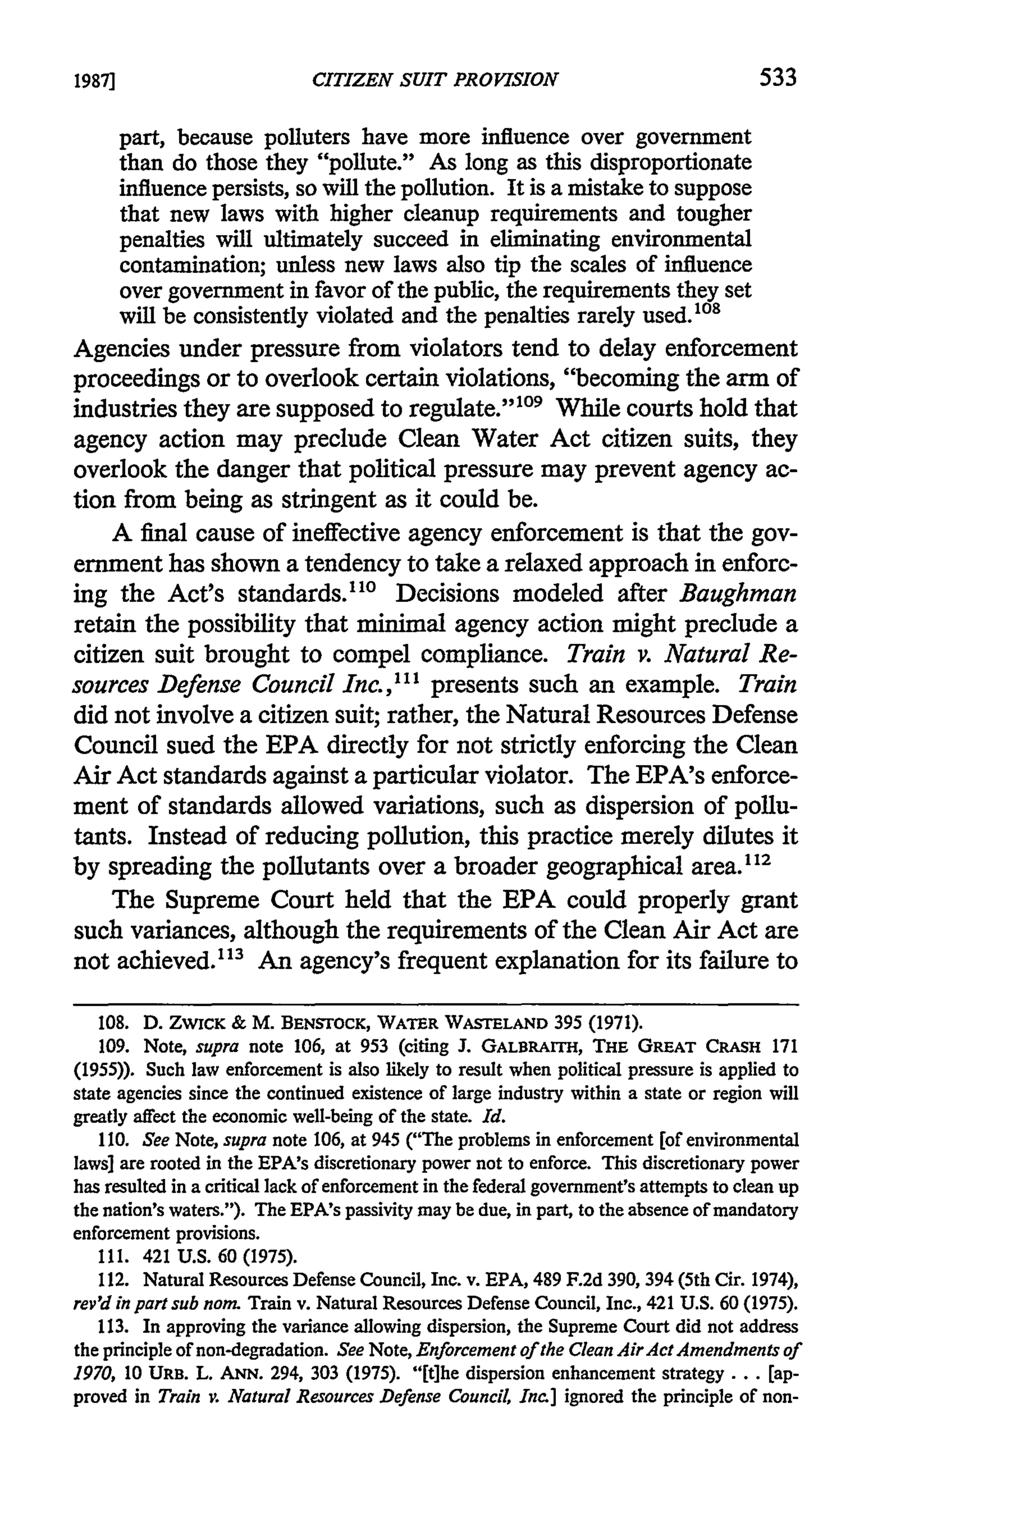 1987] CITIZEN SUIT PROVISION part, because polluters have more influence over government than do those they "pollute." As long as this disproportionate influence persists, so will the pollution.